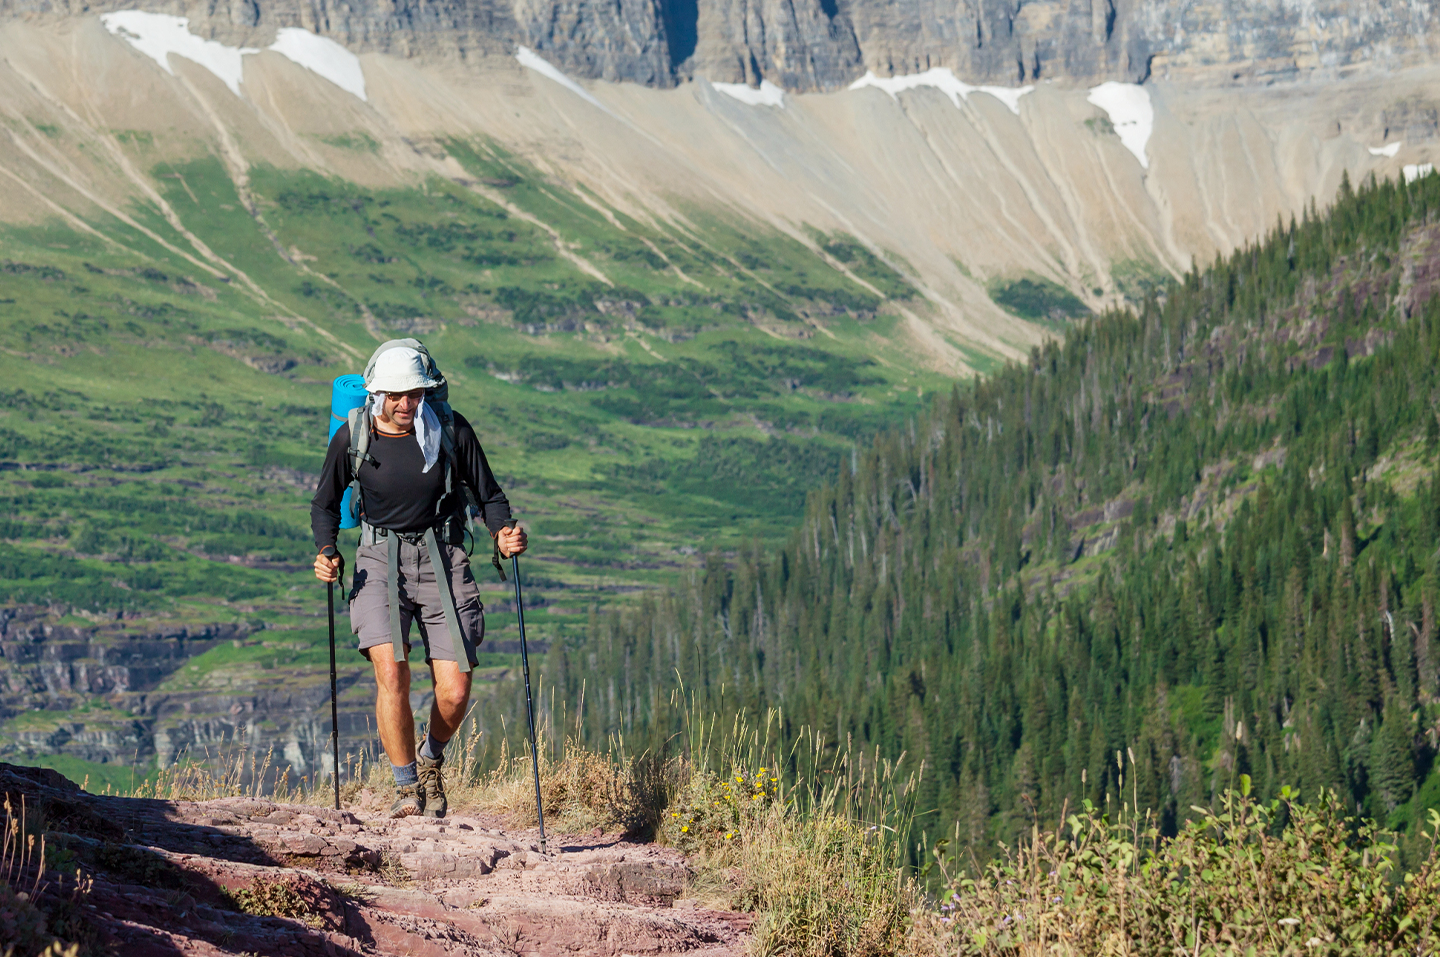 A man hiking on a trail in Montana